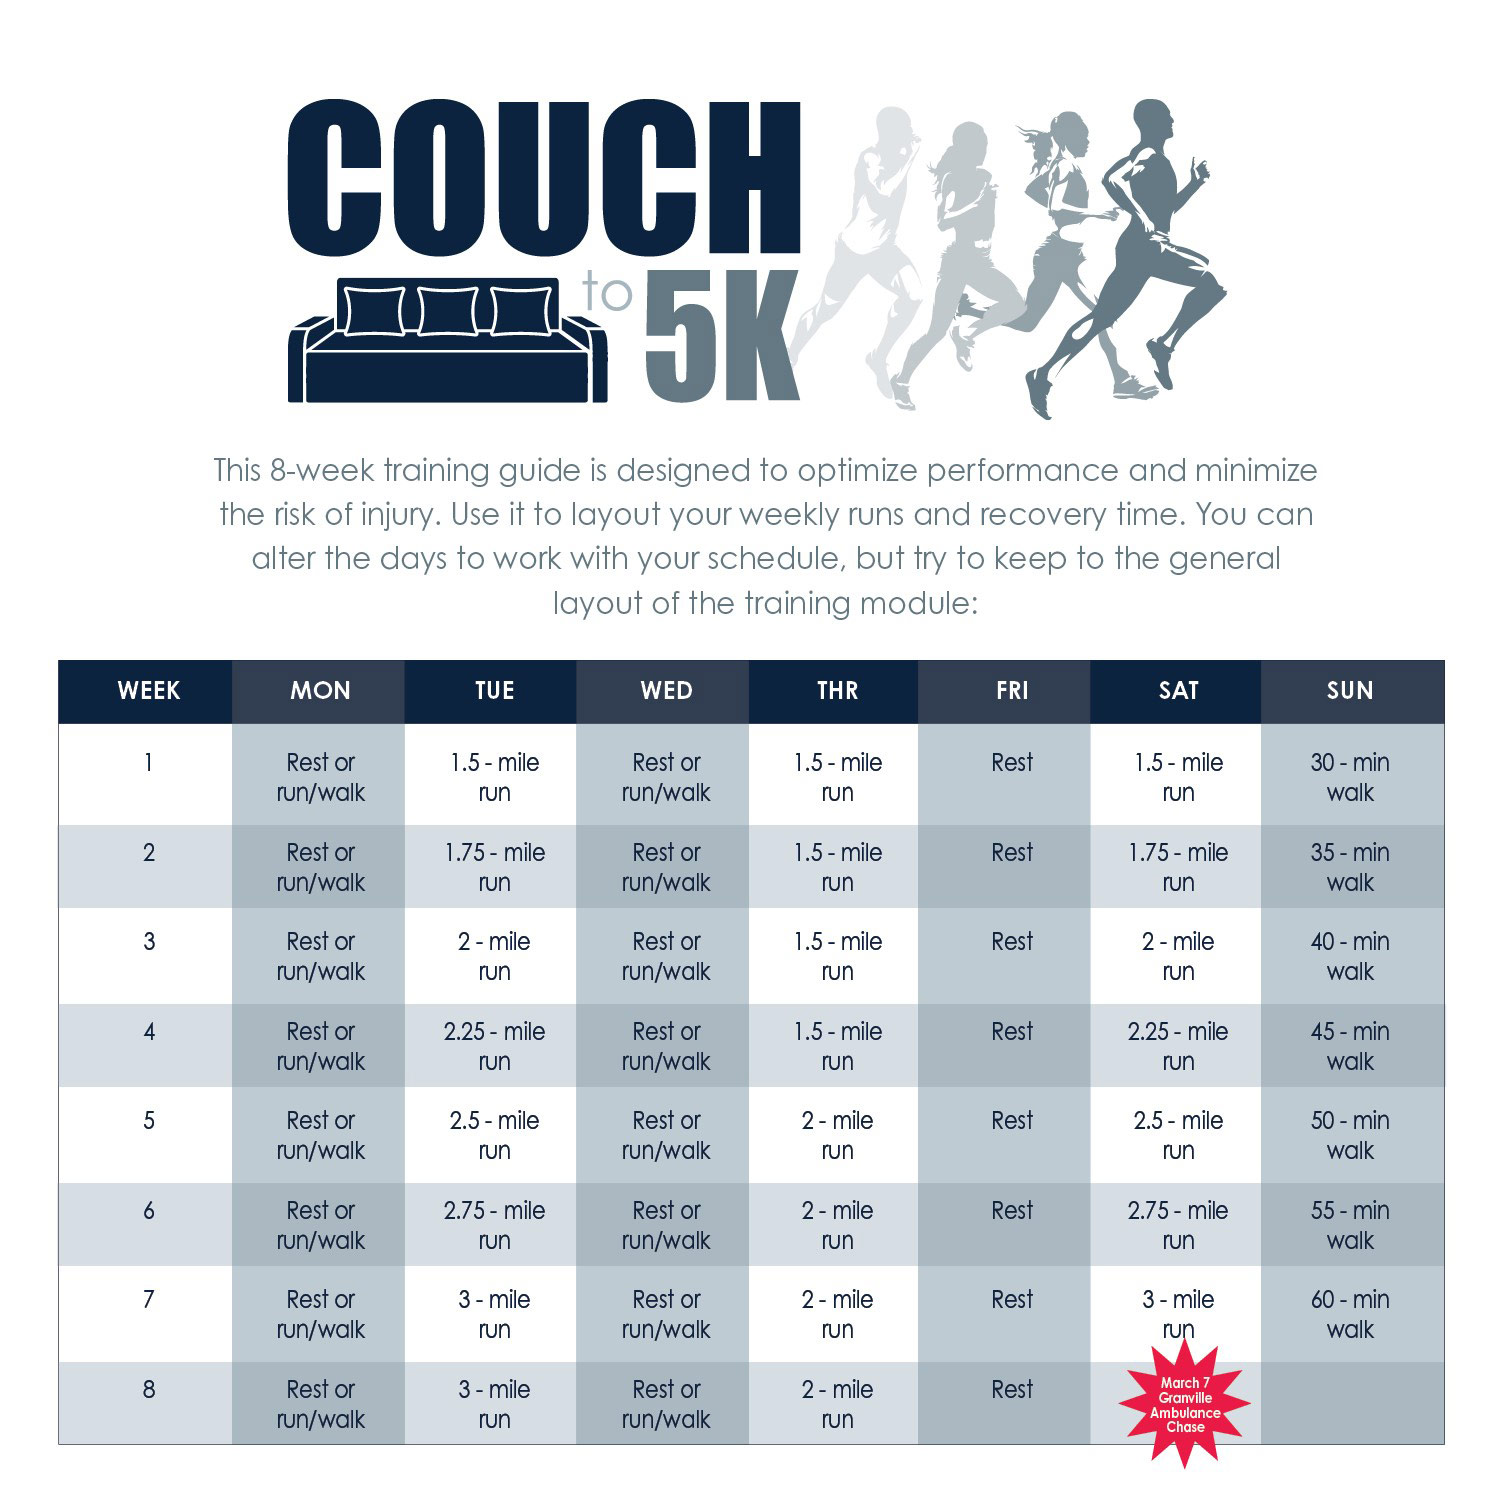 Couch to 5K Schedule showing illustration of people running with schedule below